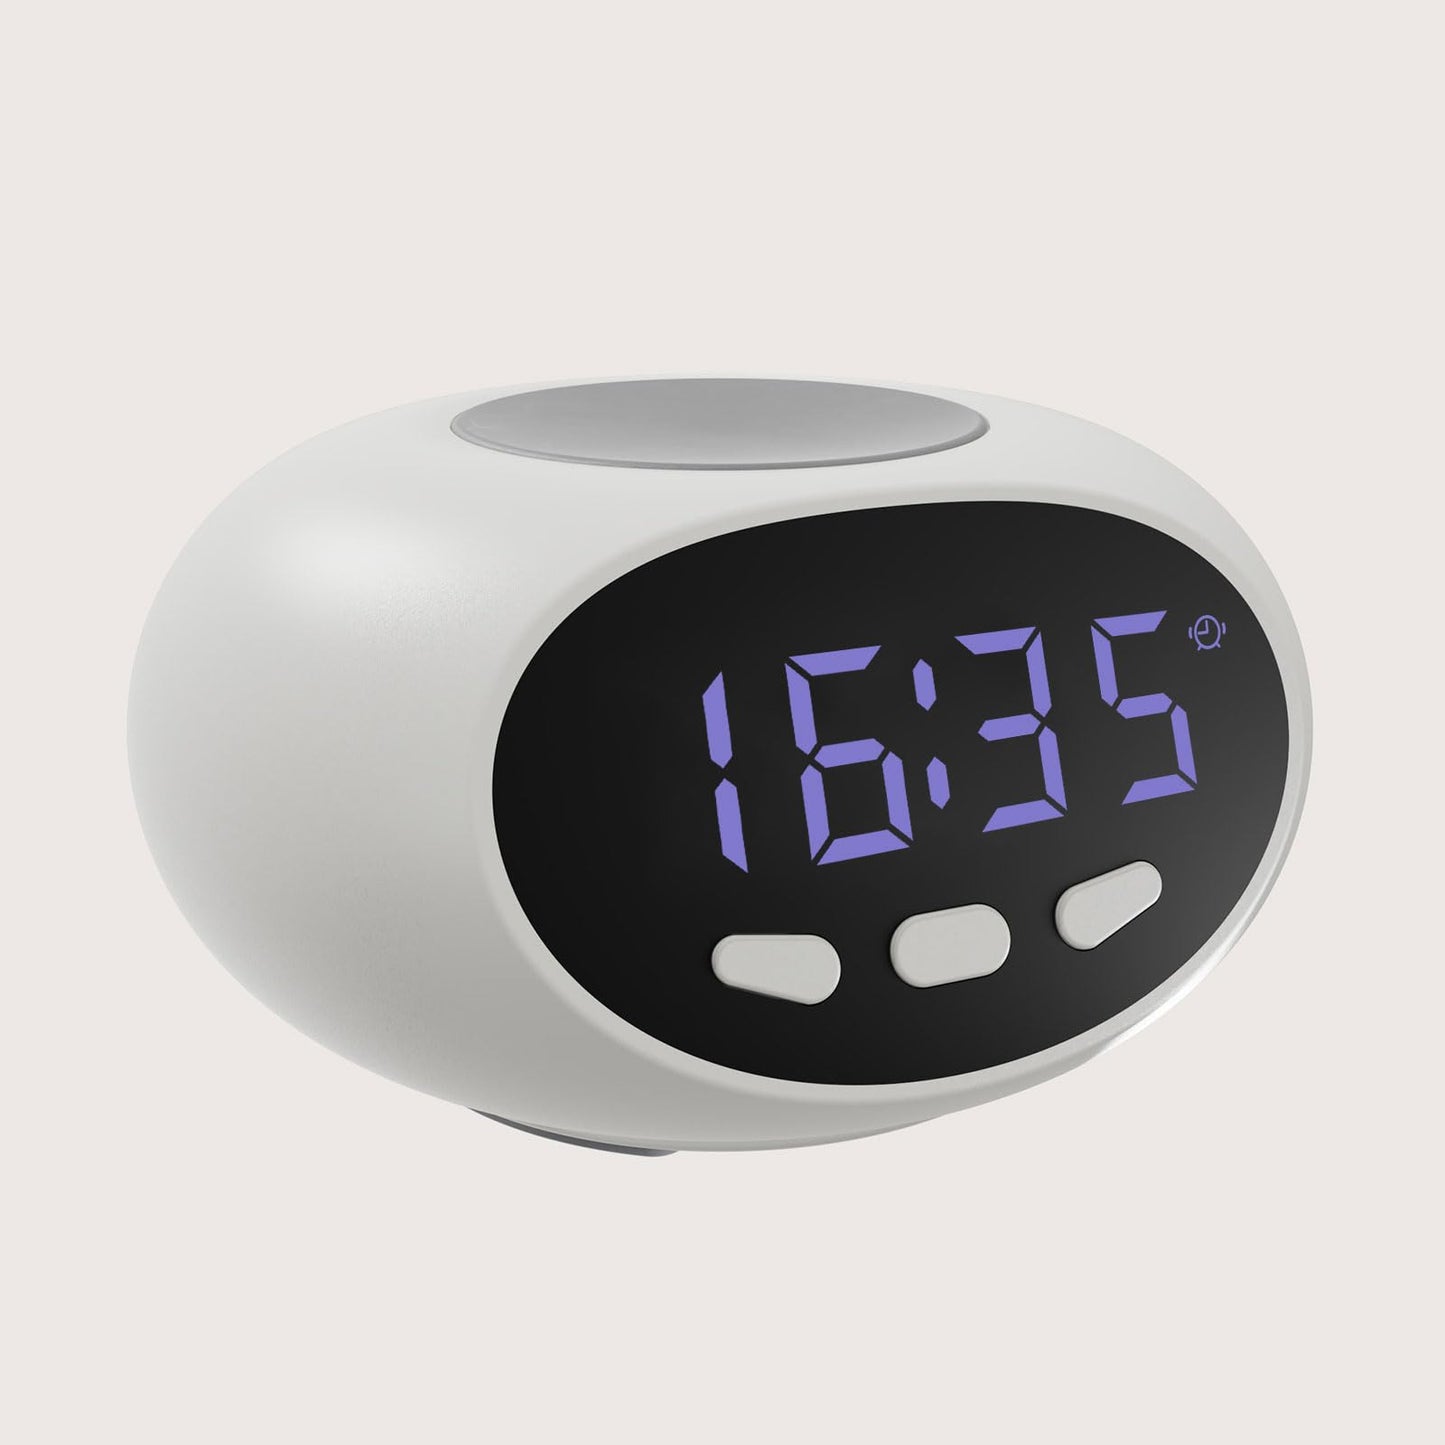 NESIGHTION Clock That can Record Reminder Messages, Elderly Clock, and Blind Alarm Clock（Black）